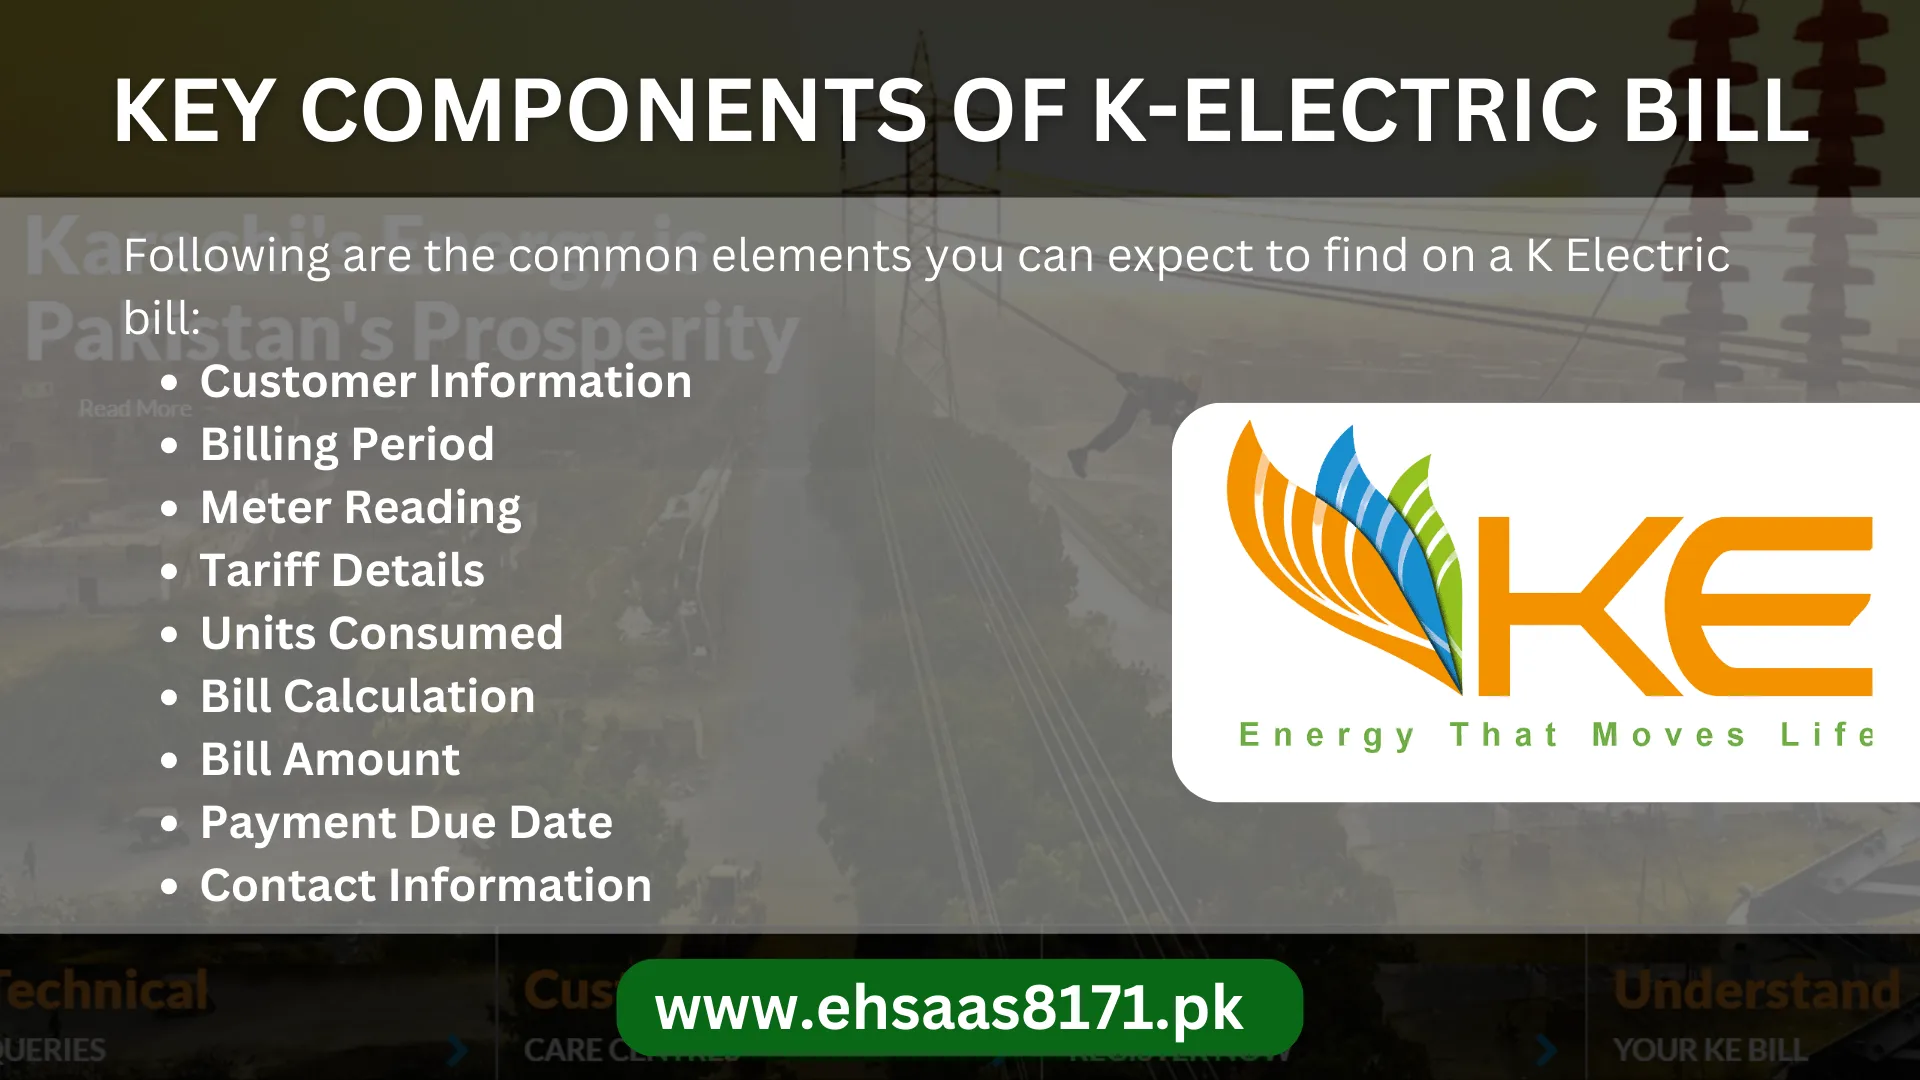 Key Components of K-Electric Bill